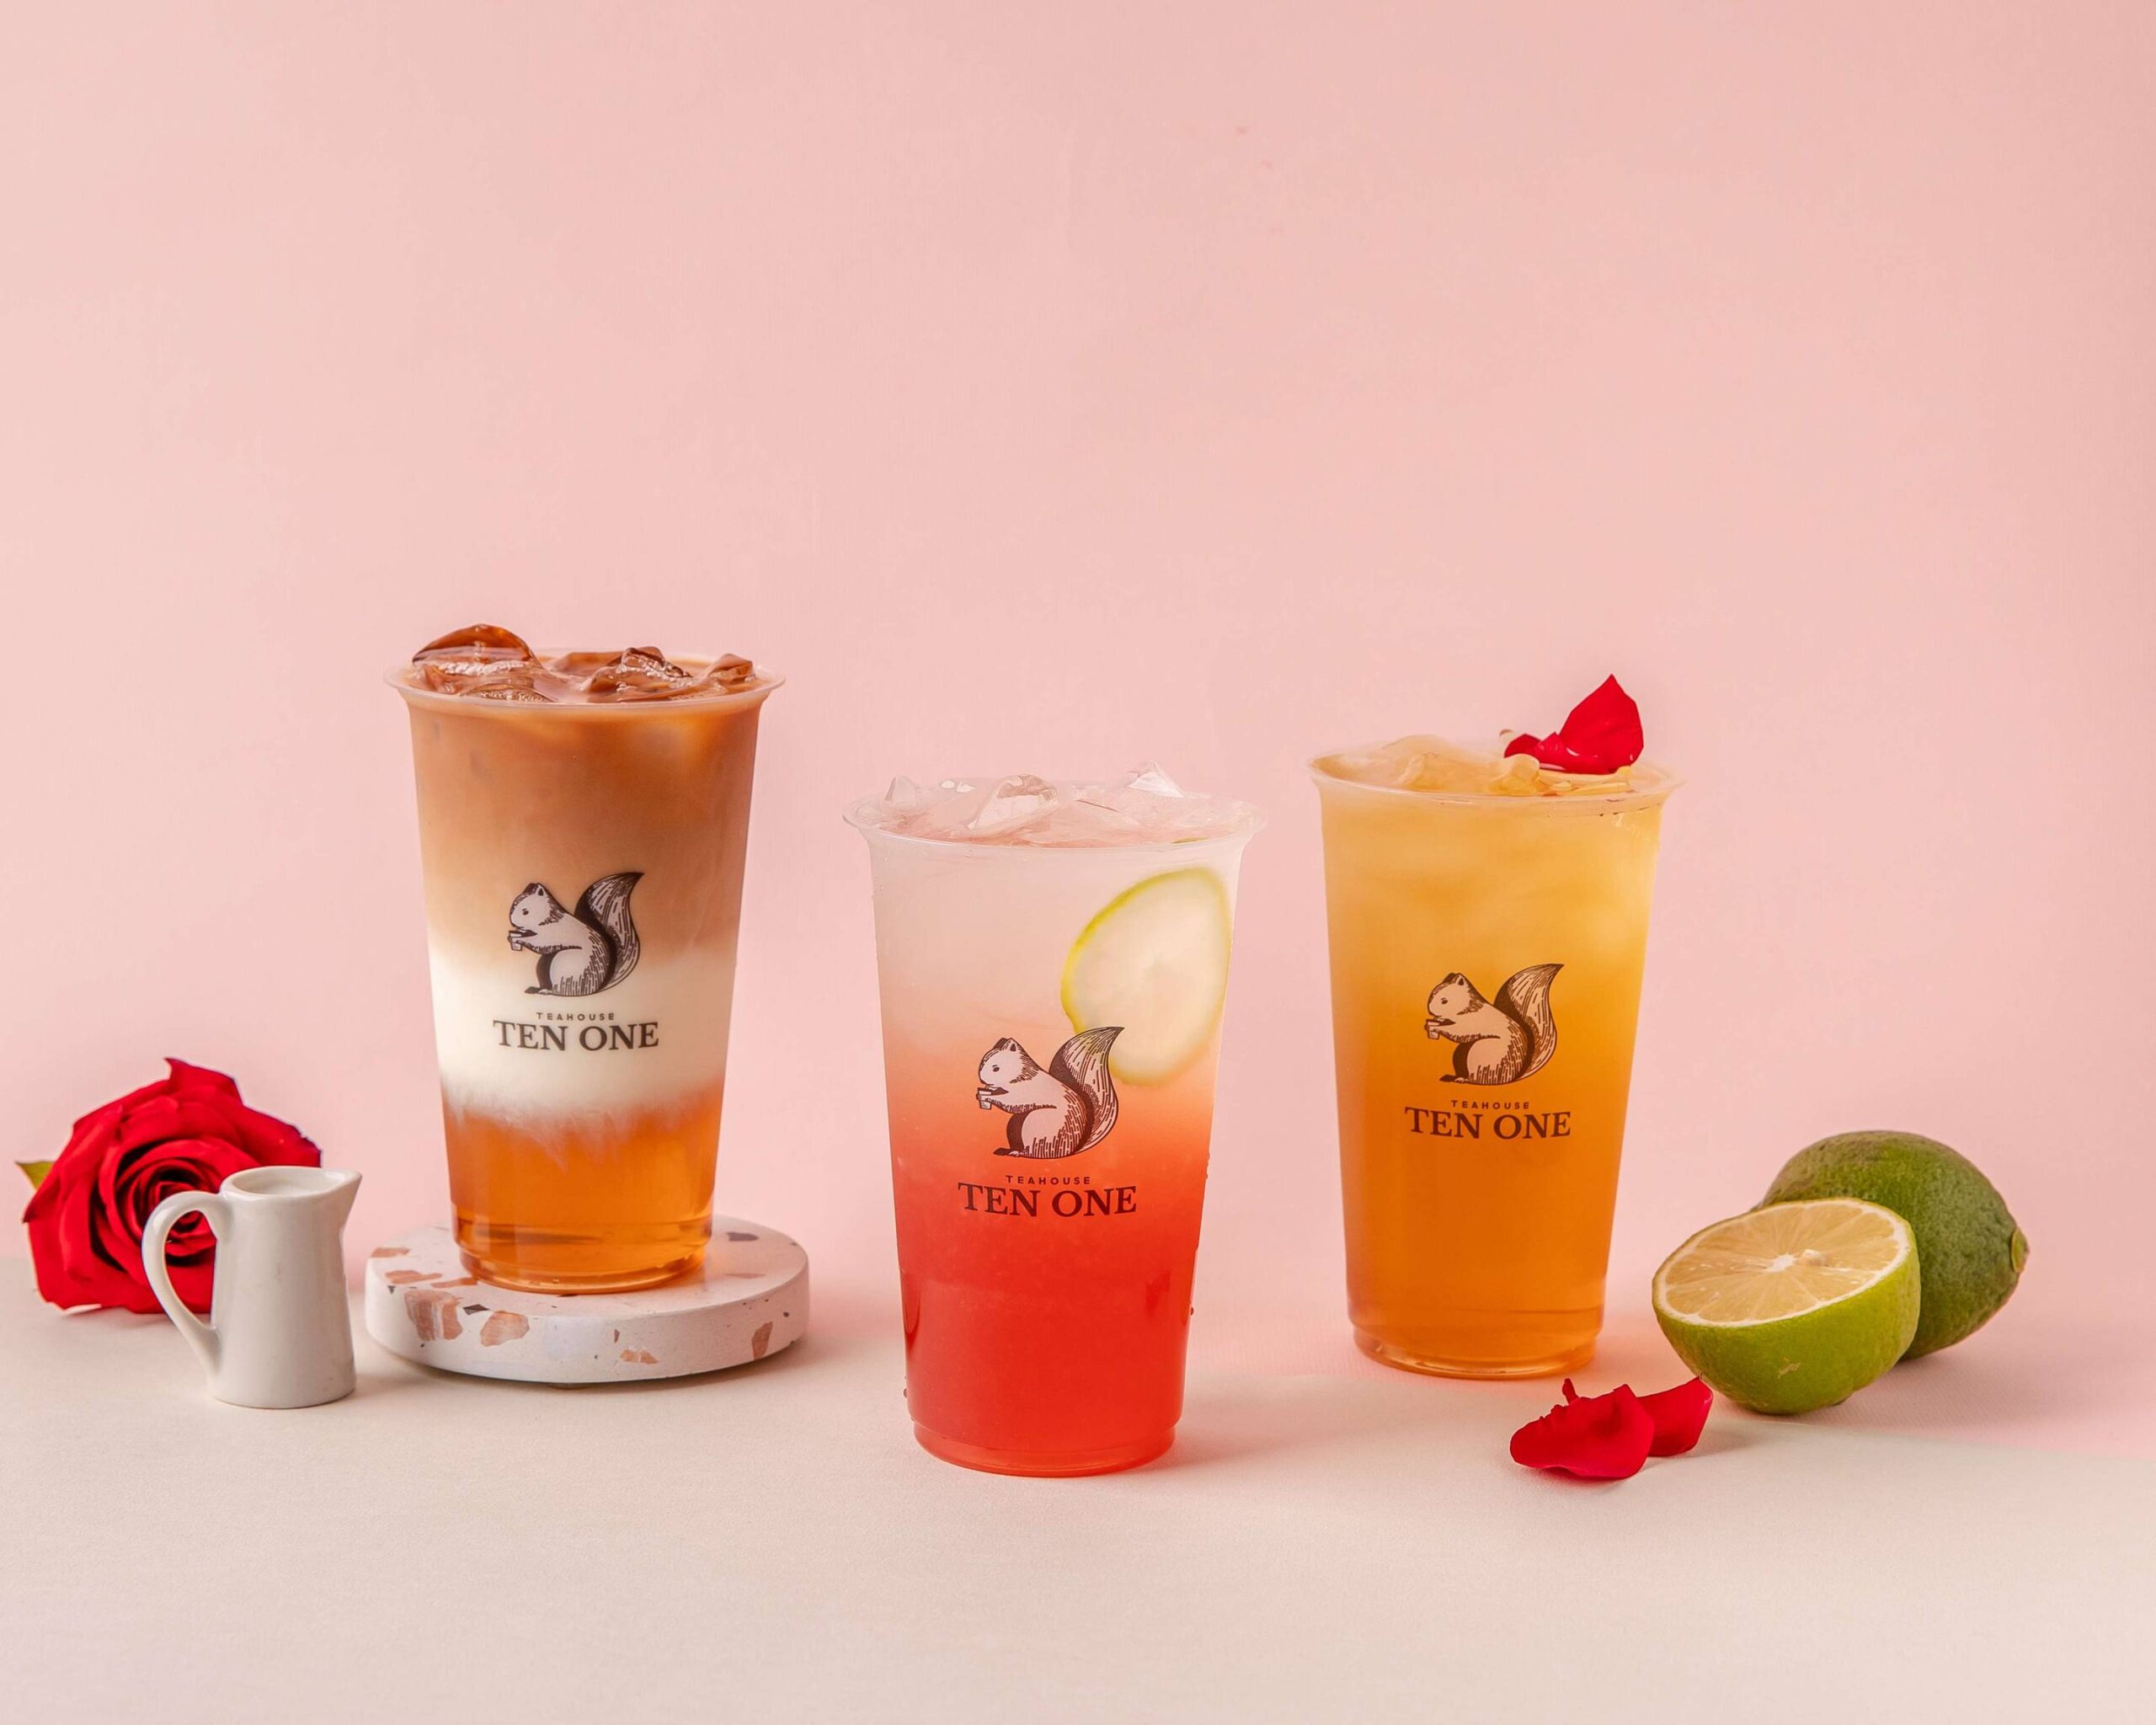 Three iced tea drinks with roses and limes on a pink background.